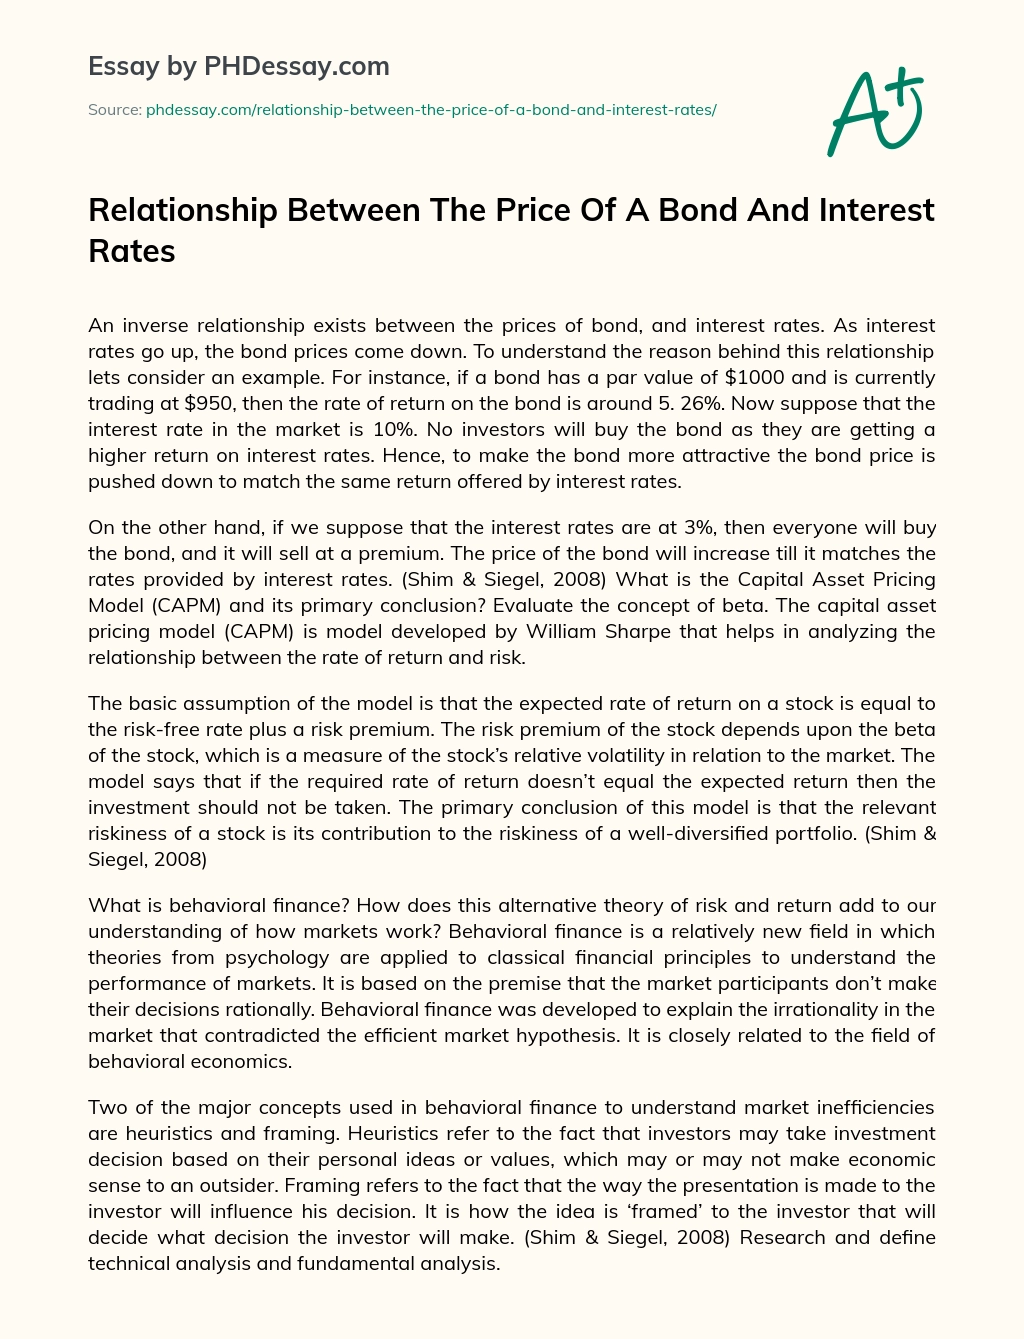 Relationship Between The Price Of A Bond And Interest Rates essay